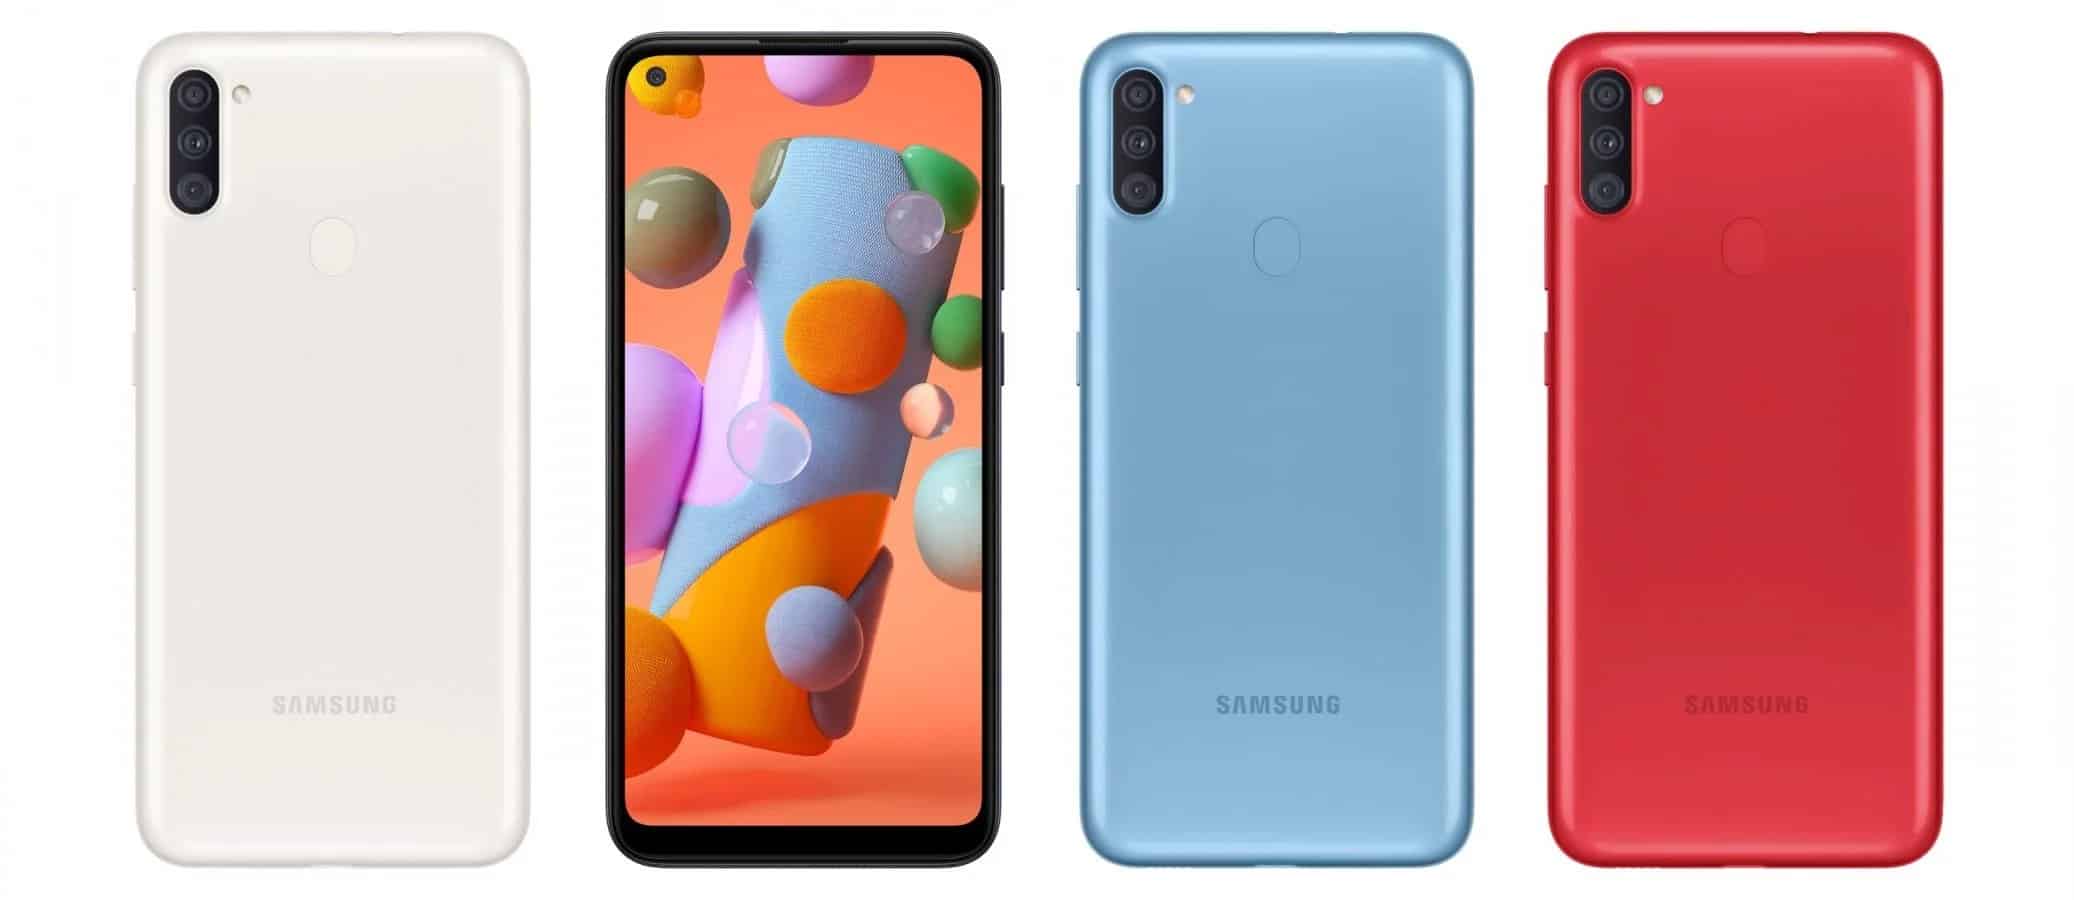 Samsung Galaxy A11 User Opinions And Reviews